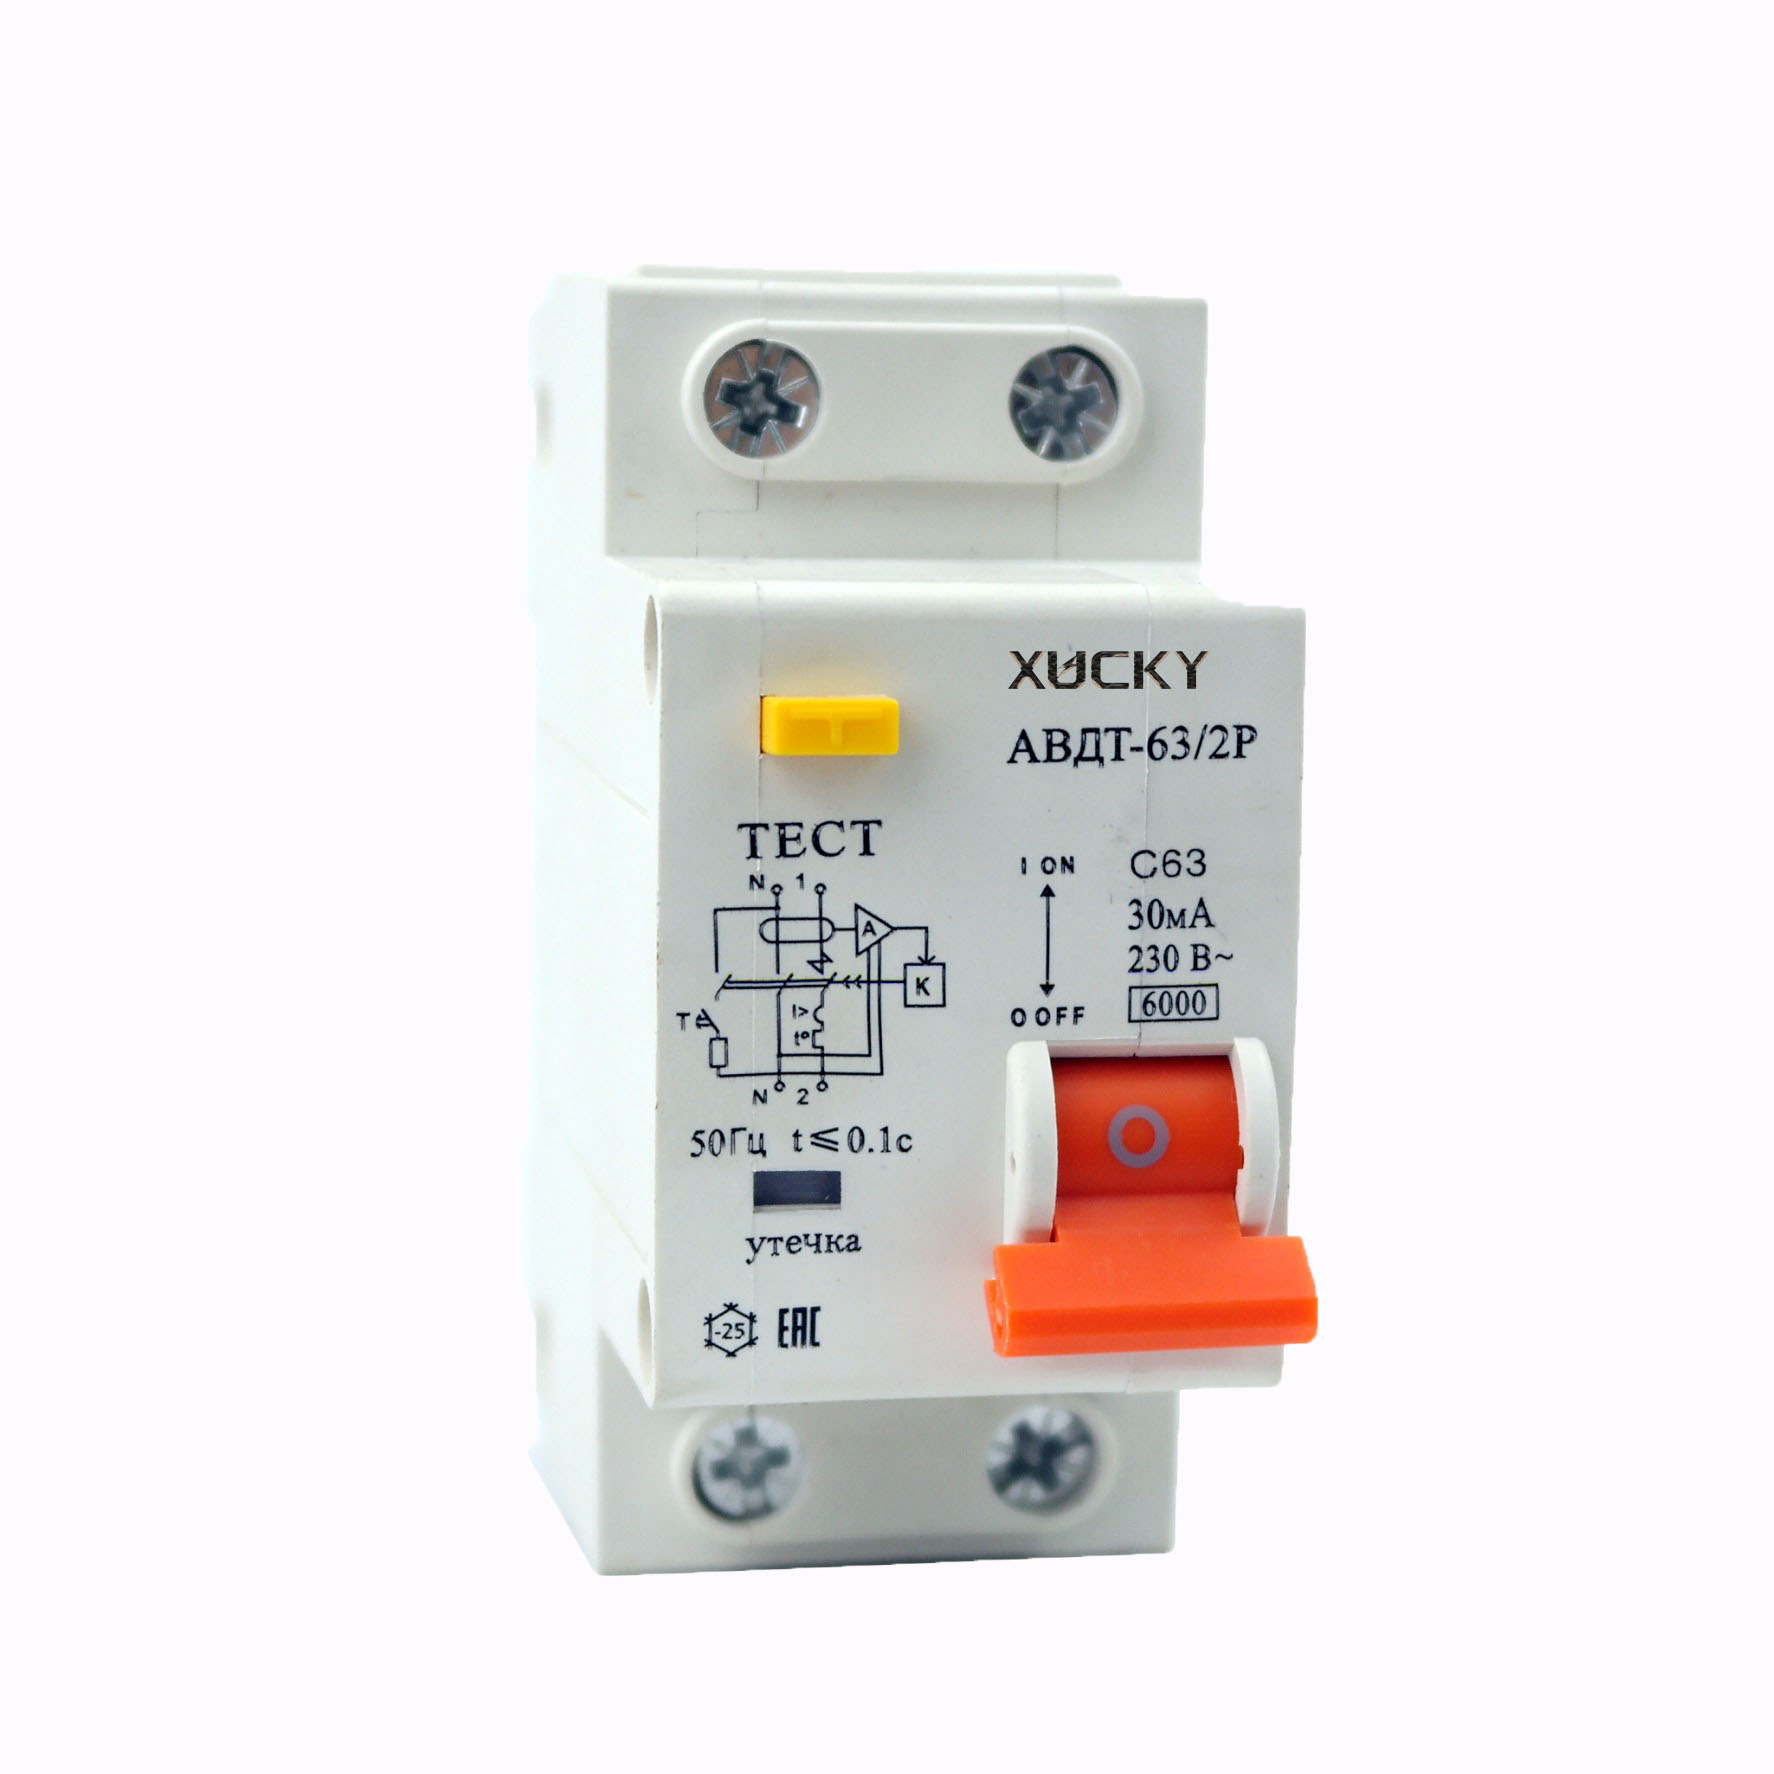 https://www.xucky.com/rcbo-4-5ka-residual-current-circuit-breaker-with-overcurrent-protection-product/